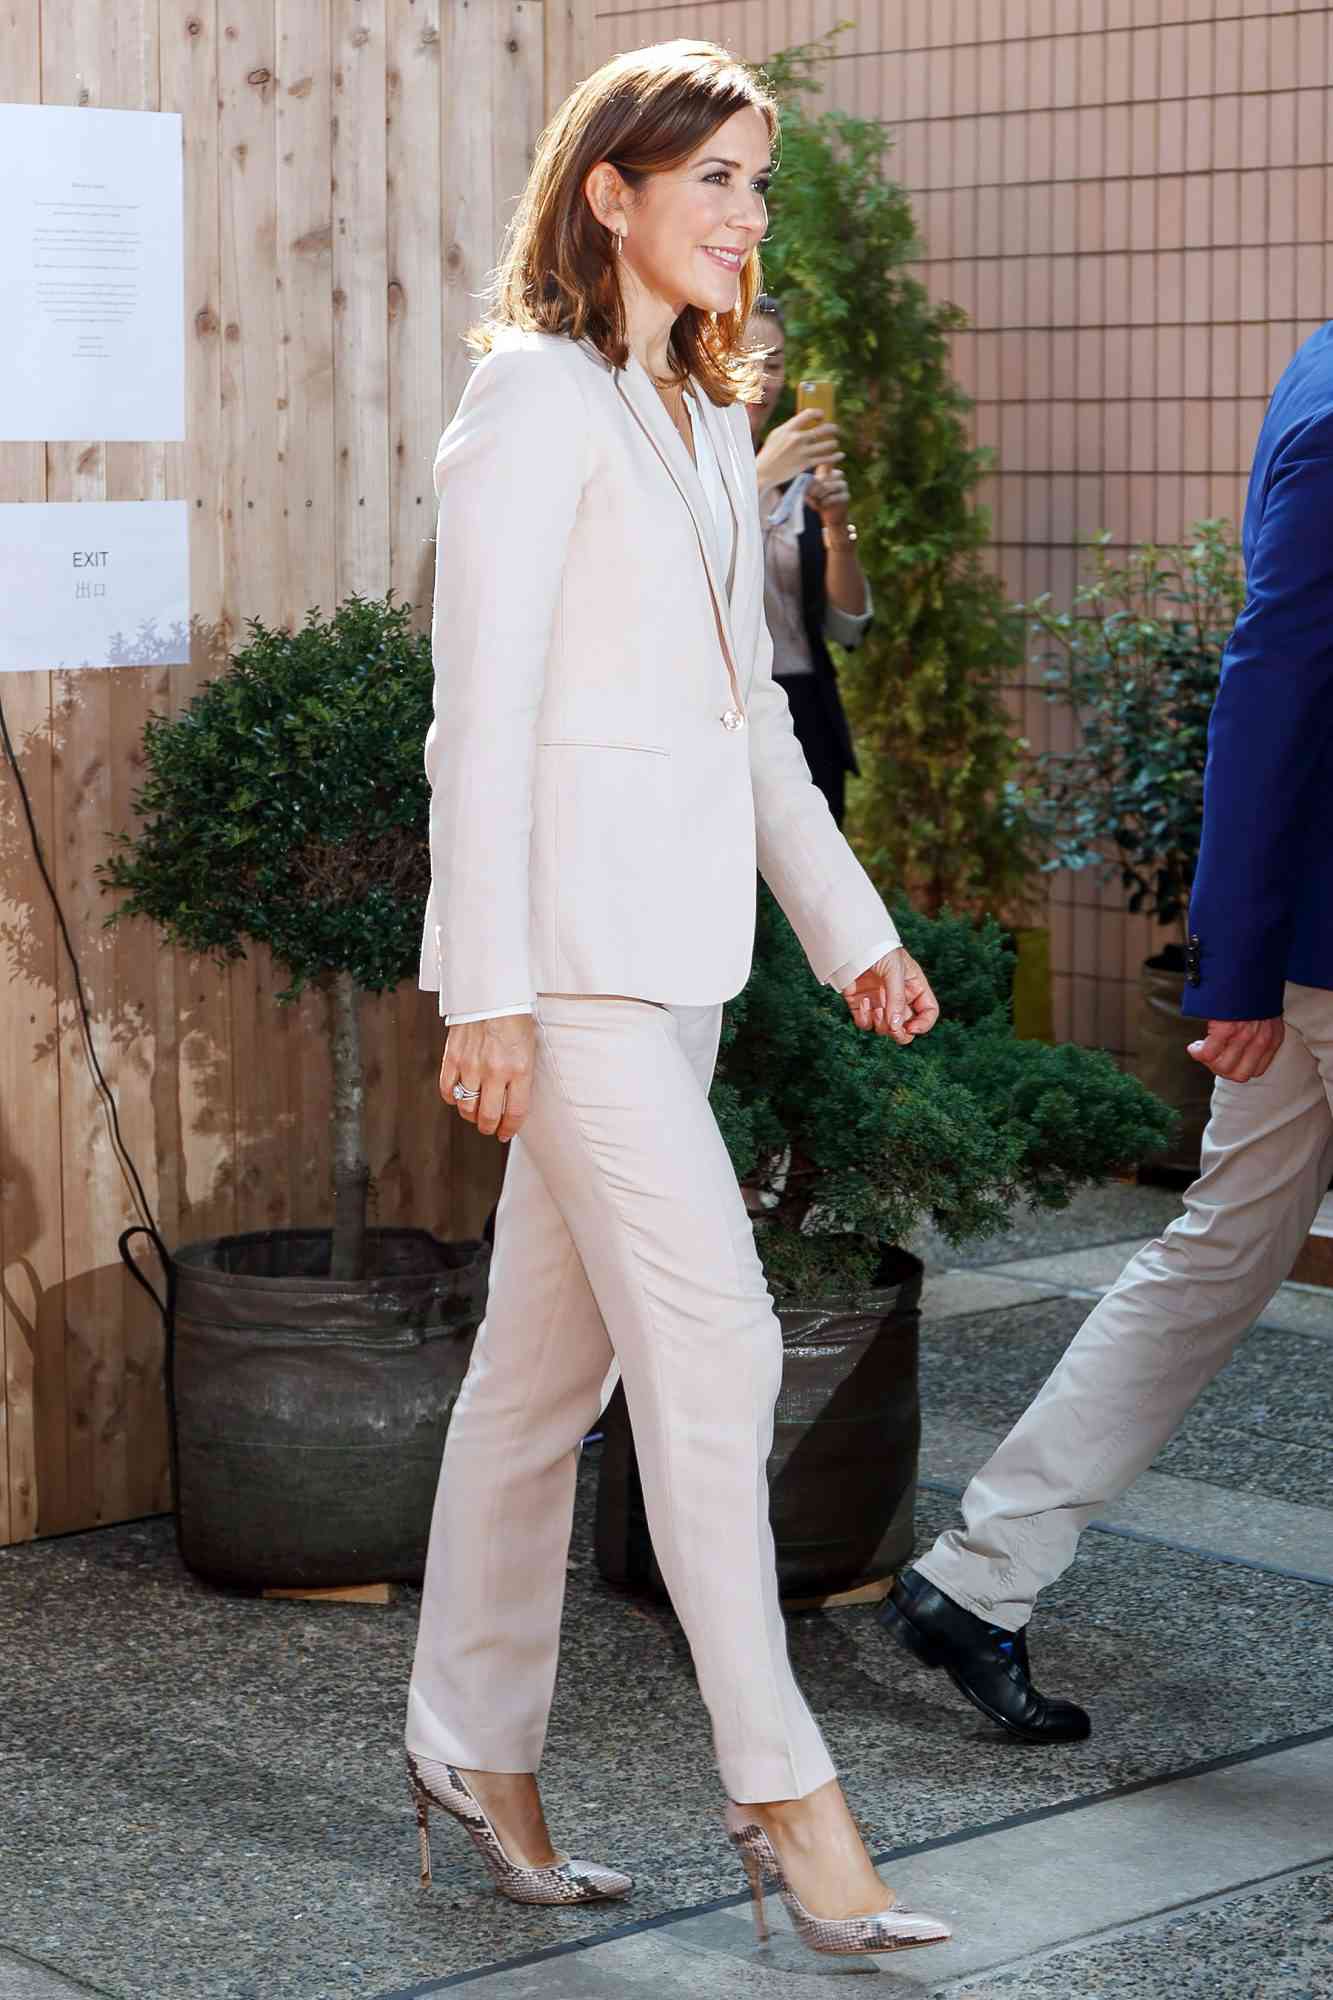 Royal Women Who Know How to Rock a Pantsuit